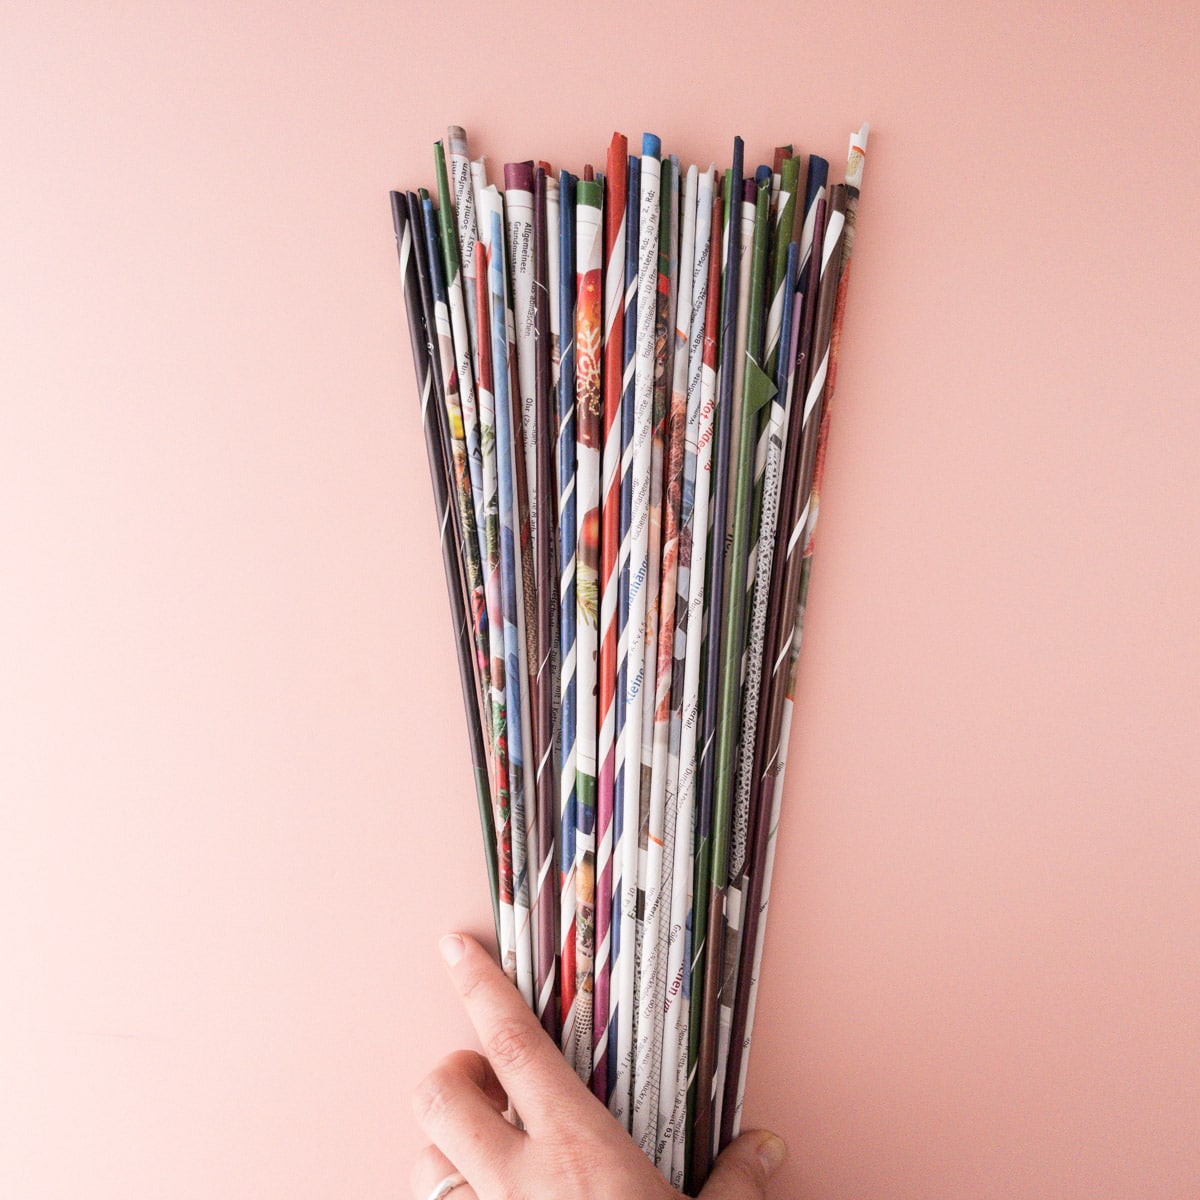 Paper tubes from old magazines